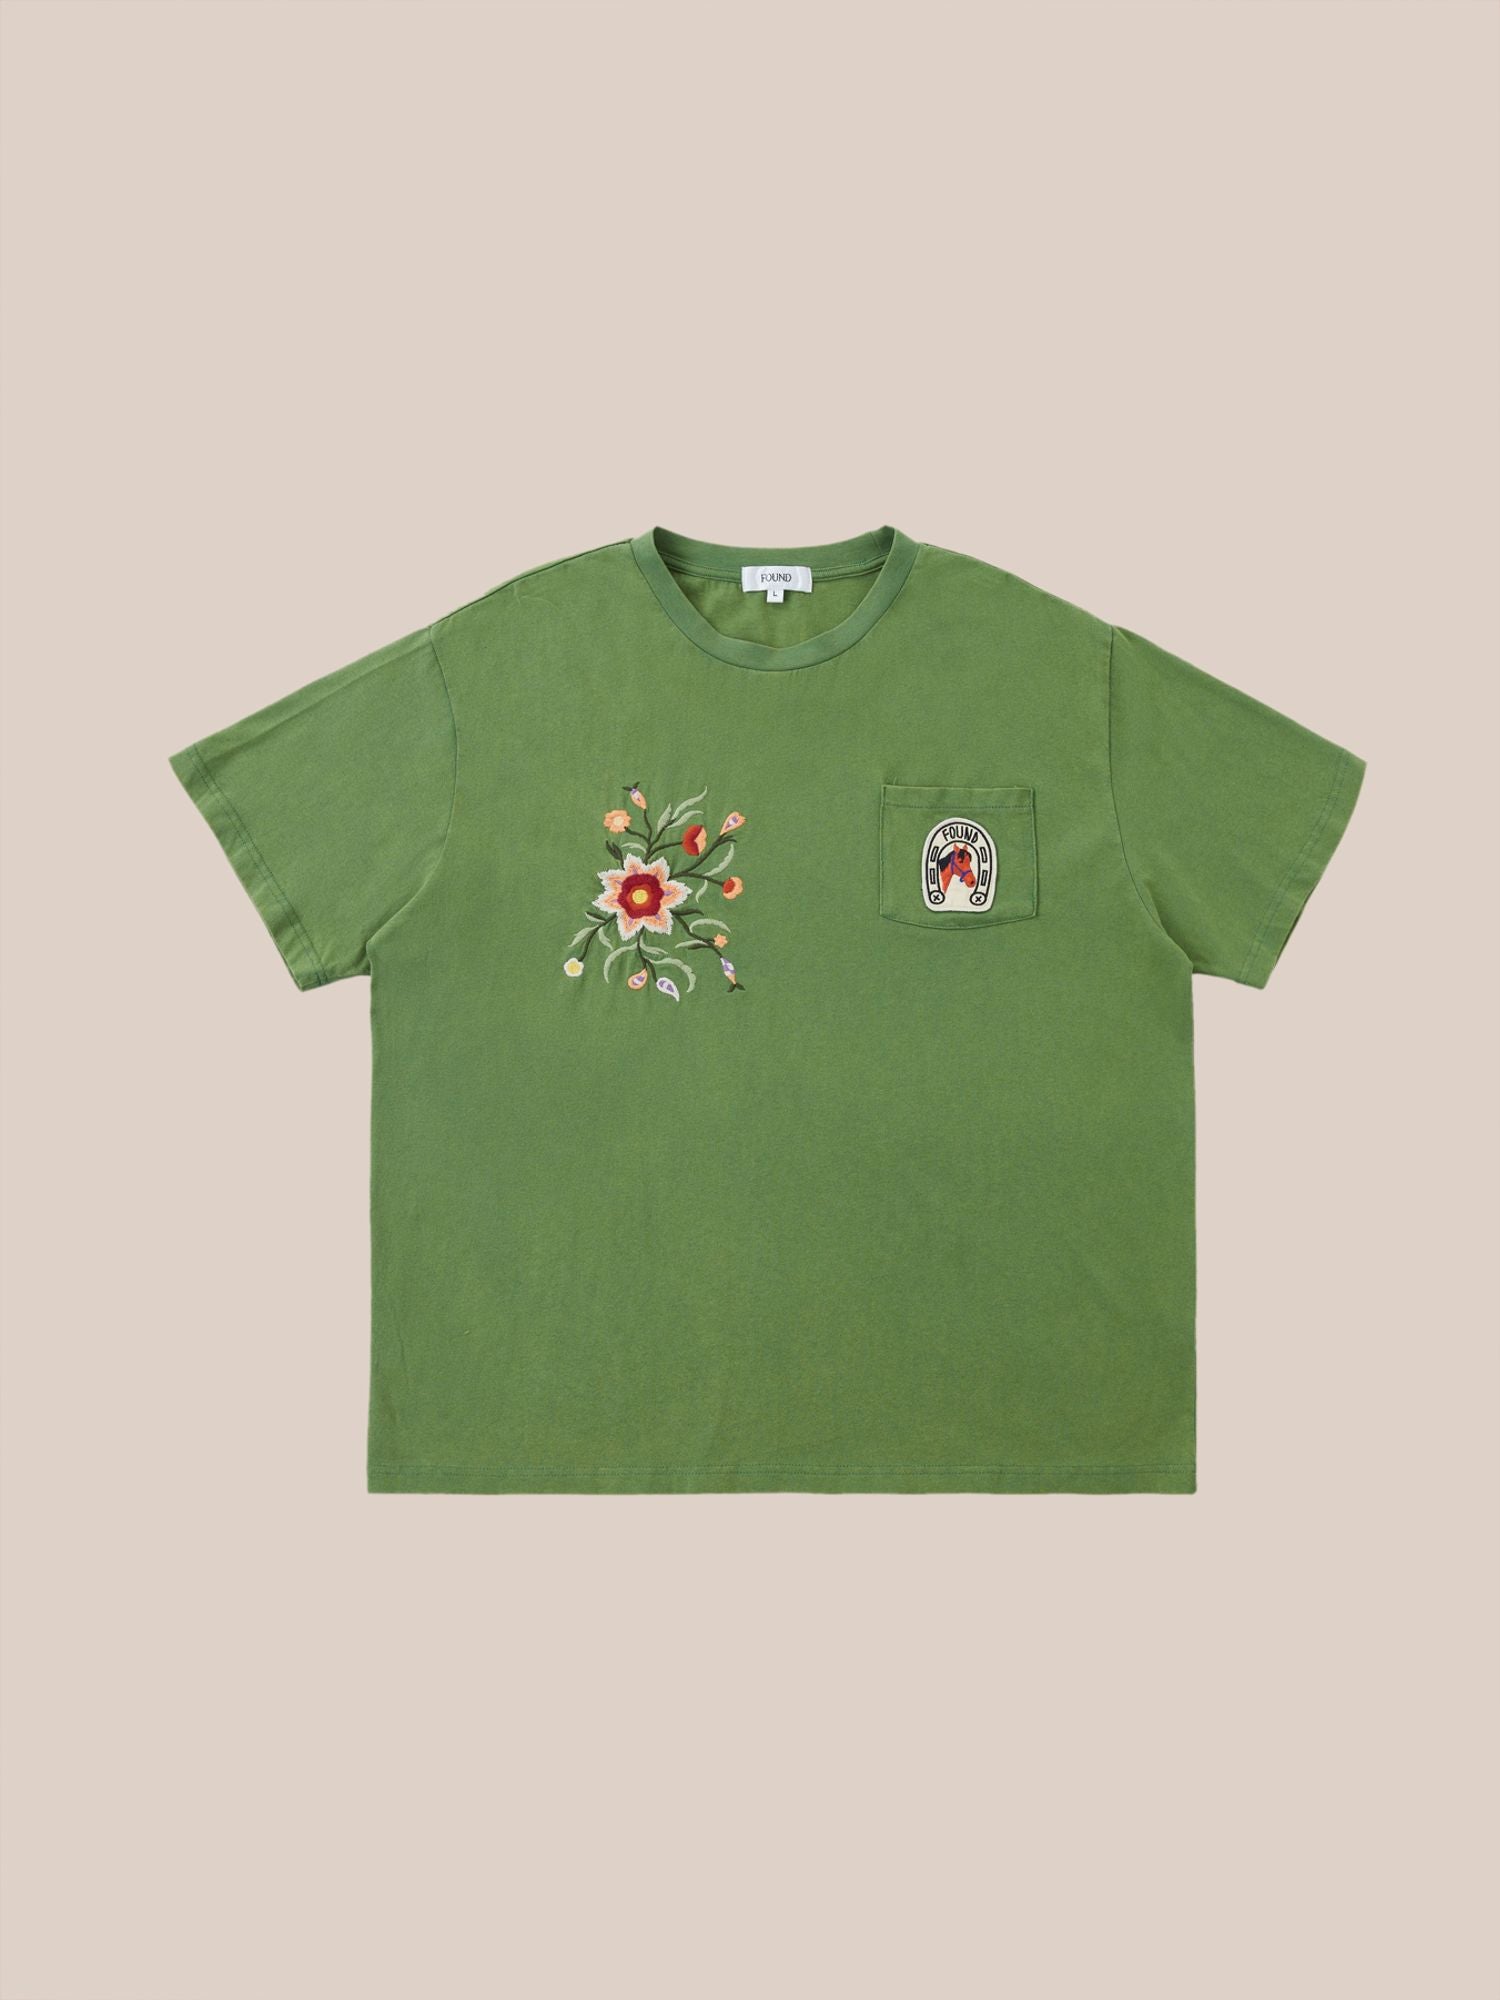 Pine Needle Farm Tee by Found, with intricate embroidery on the left side and a patch on the right chest, displayed on a beige background.